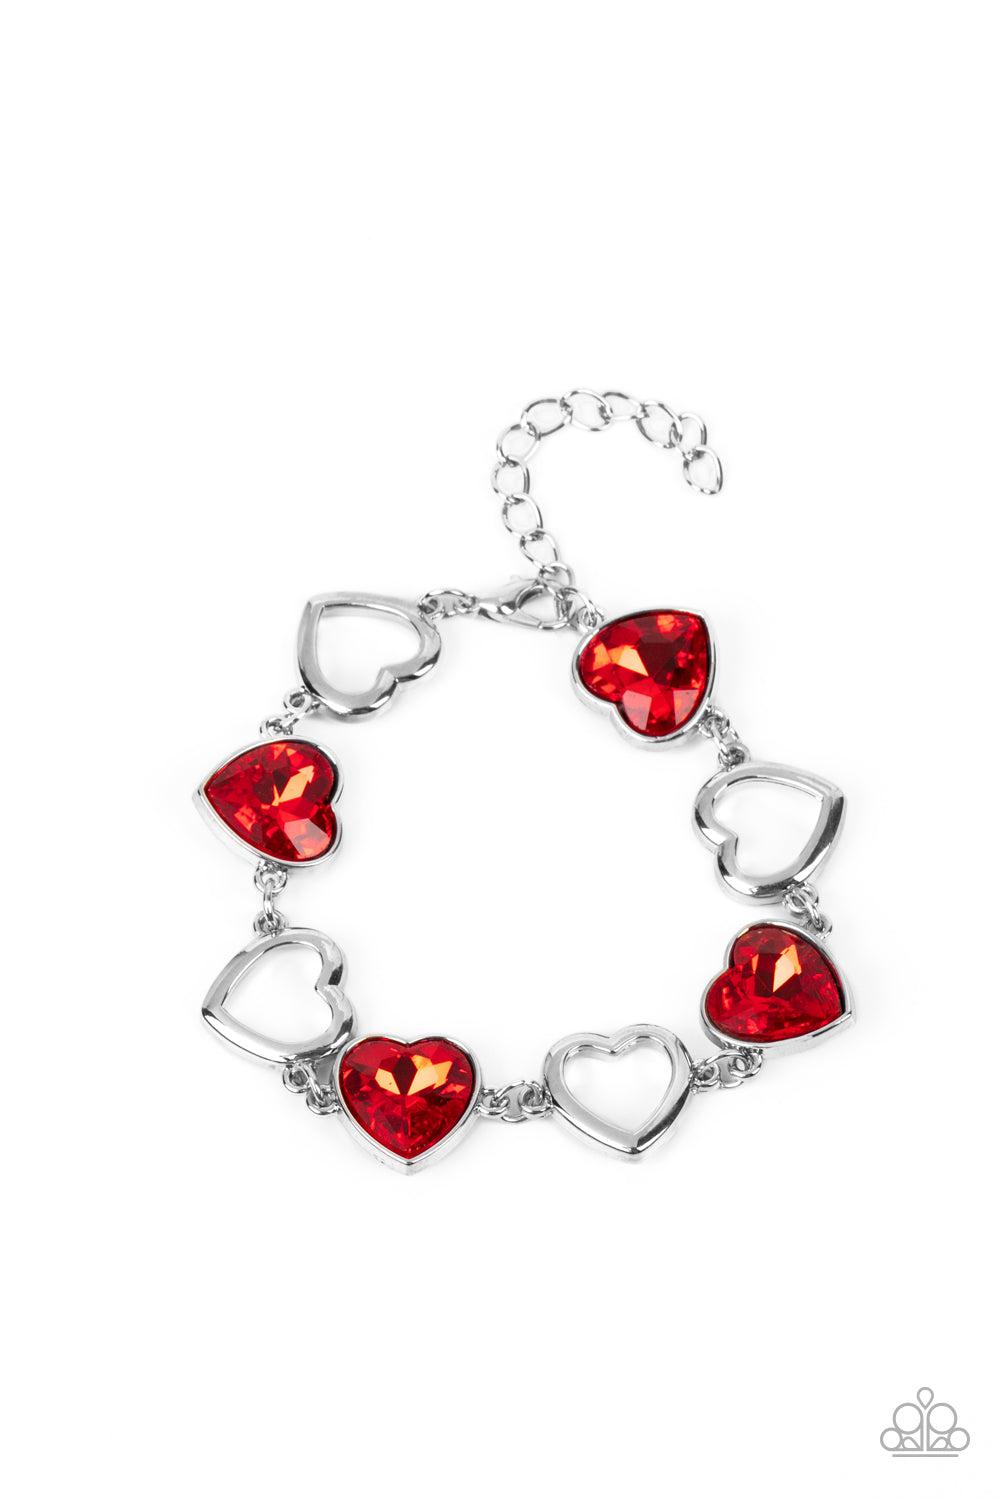 Sentimental Sweethearts Red Heart Bracelet - Paparazzi Accessories- lightbox - CarasShop.com - $5 Jewelry by Cara Jewels